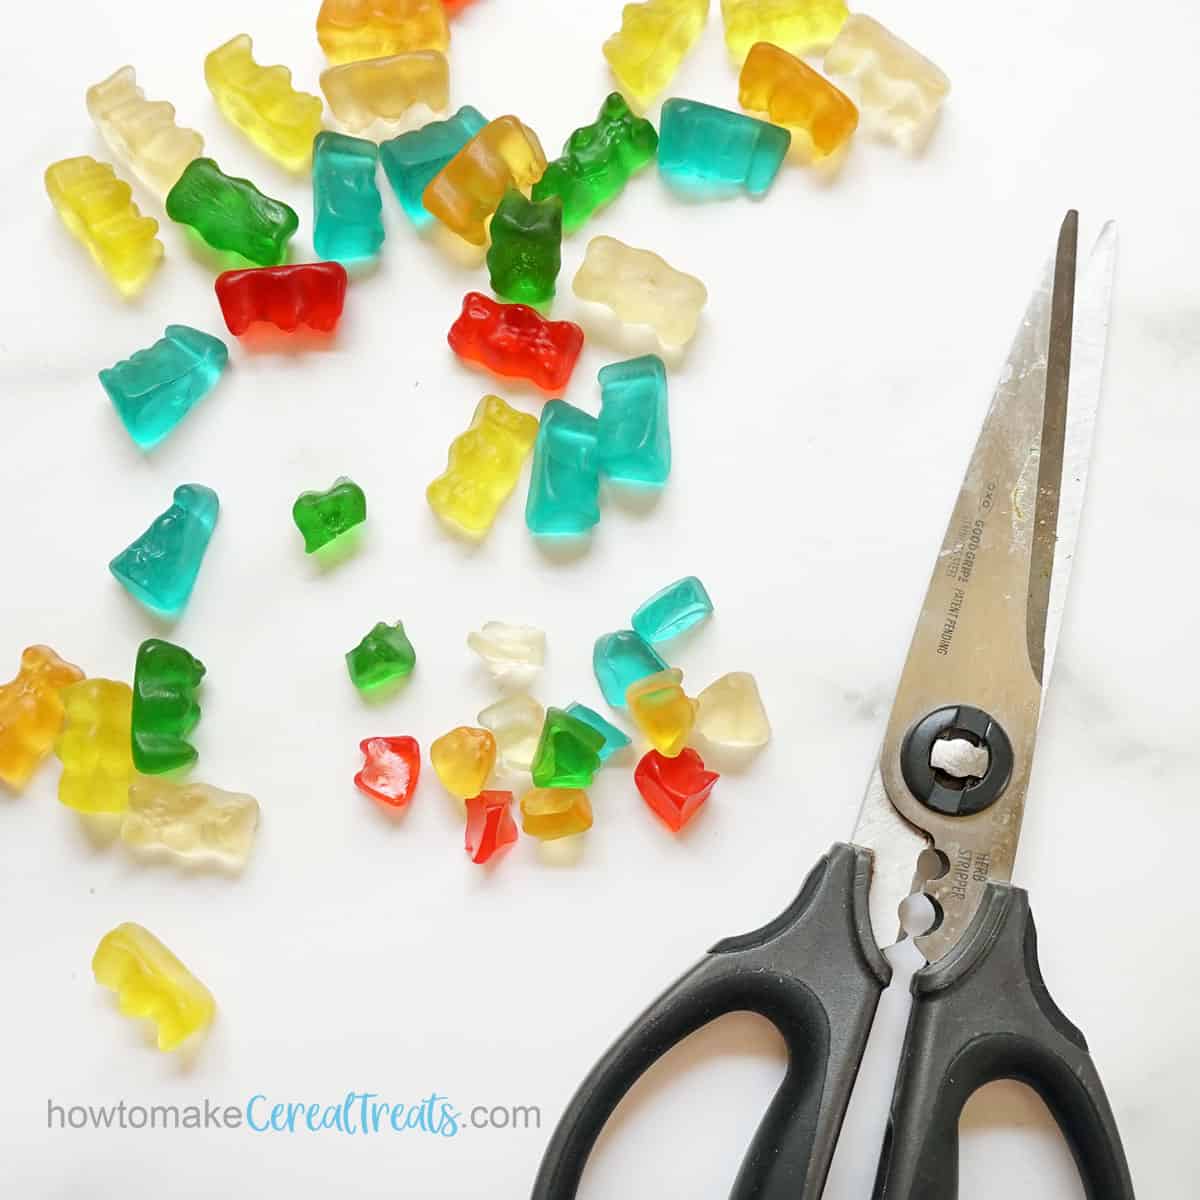 chopping gummy bears into small pieces